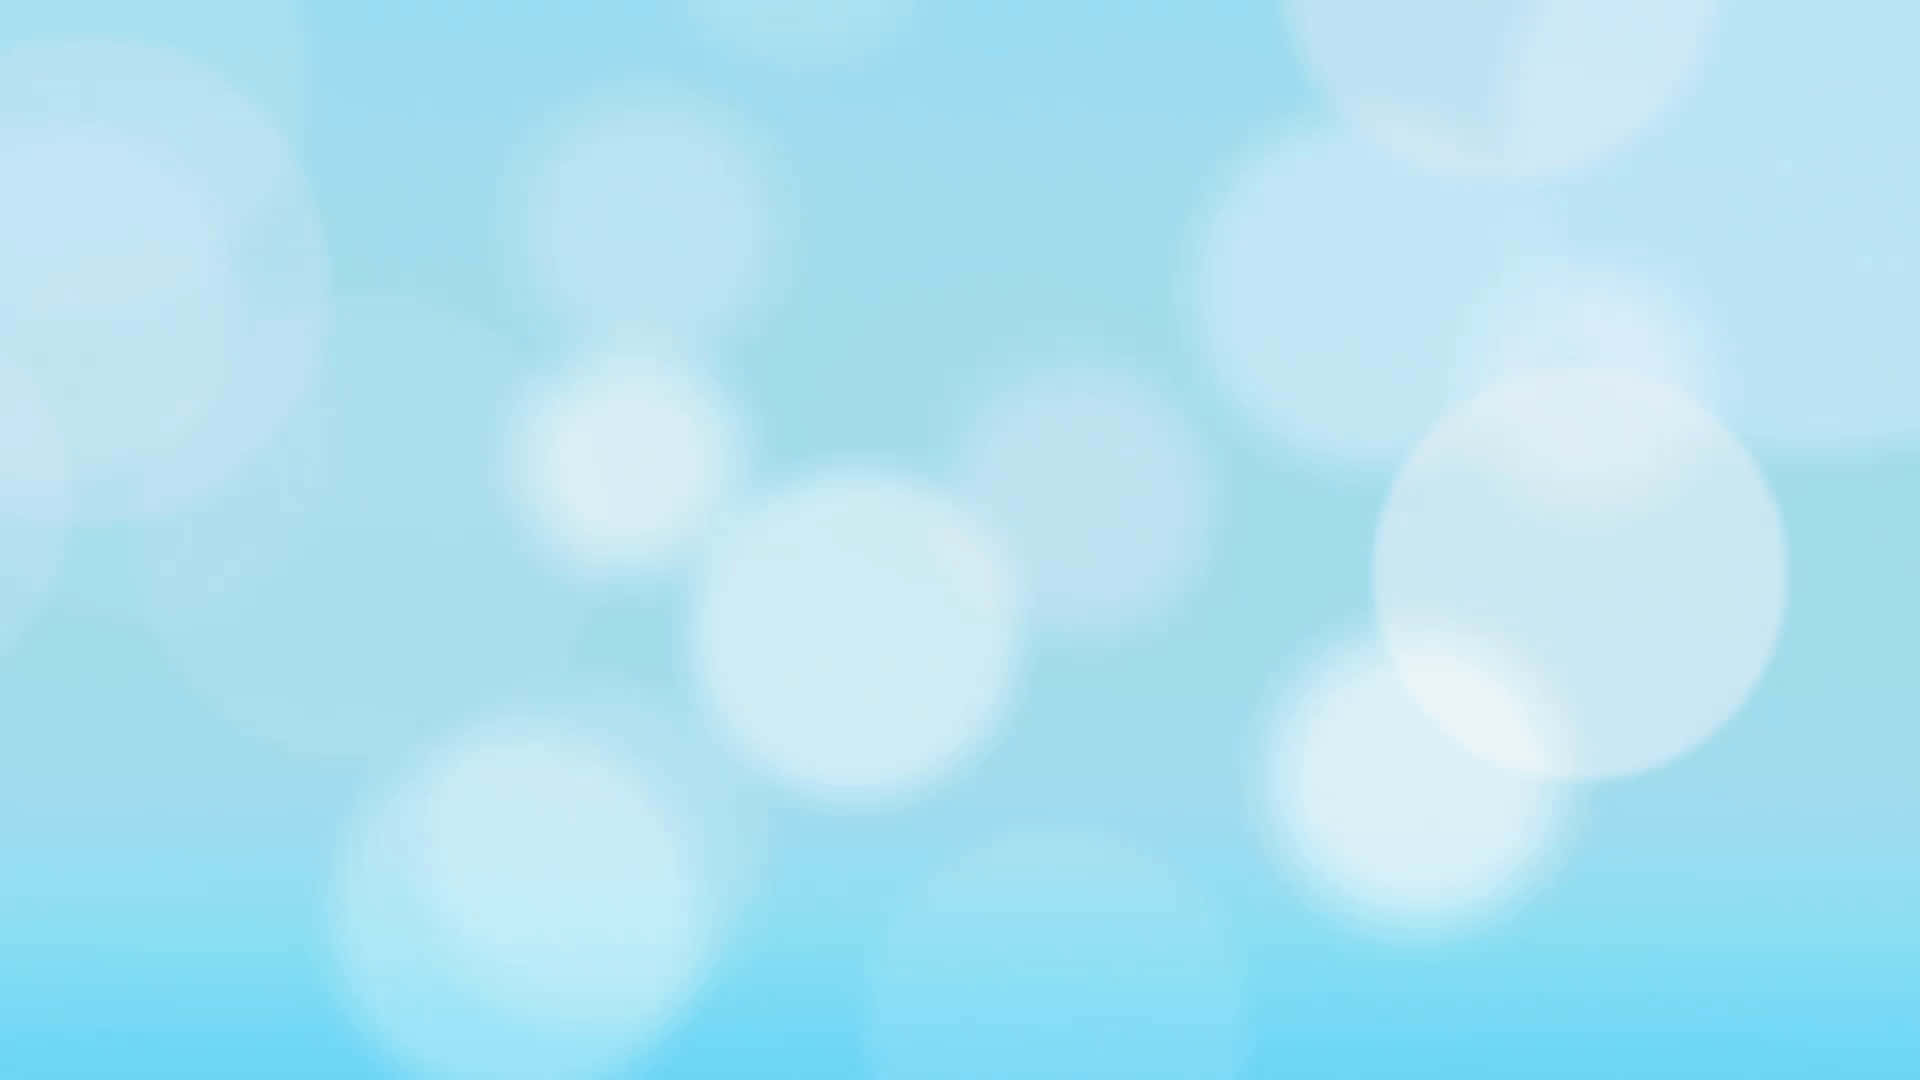 A soft, soothing blue background